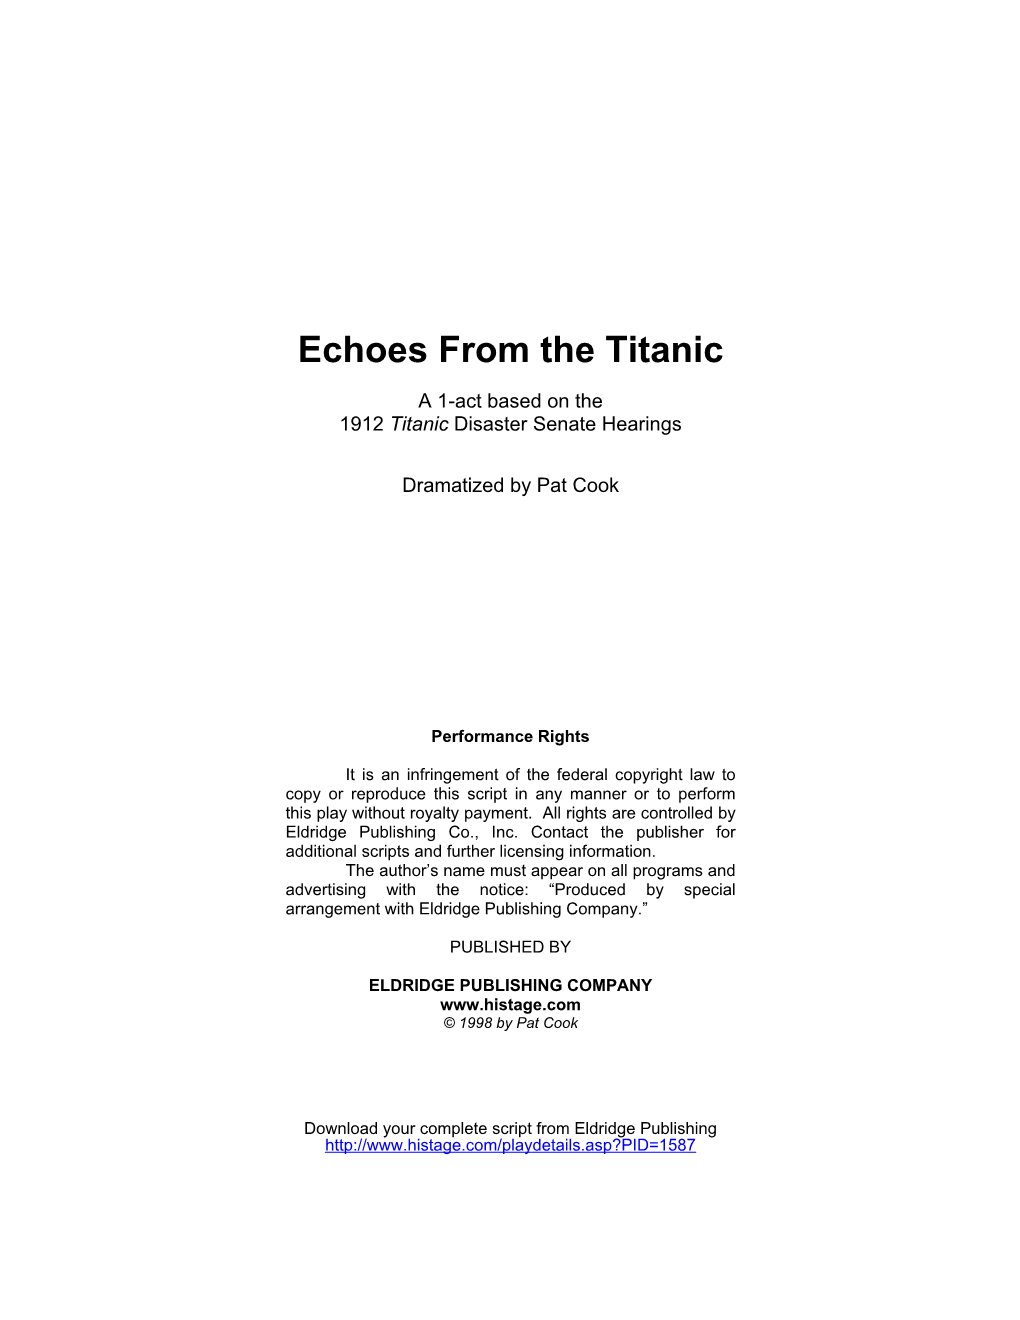 Echoes from the Titanic